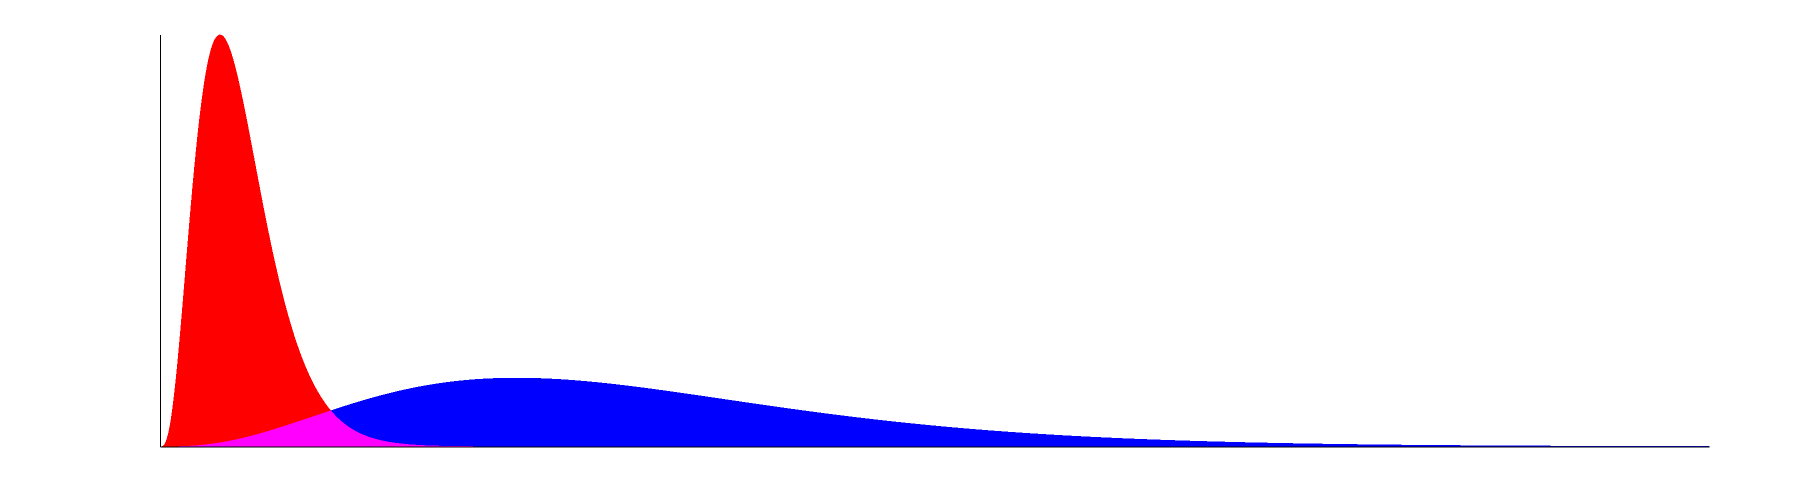 Gamma distributions with (k=4, theta=1) in red, (k=4, theta=6) in blue